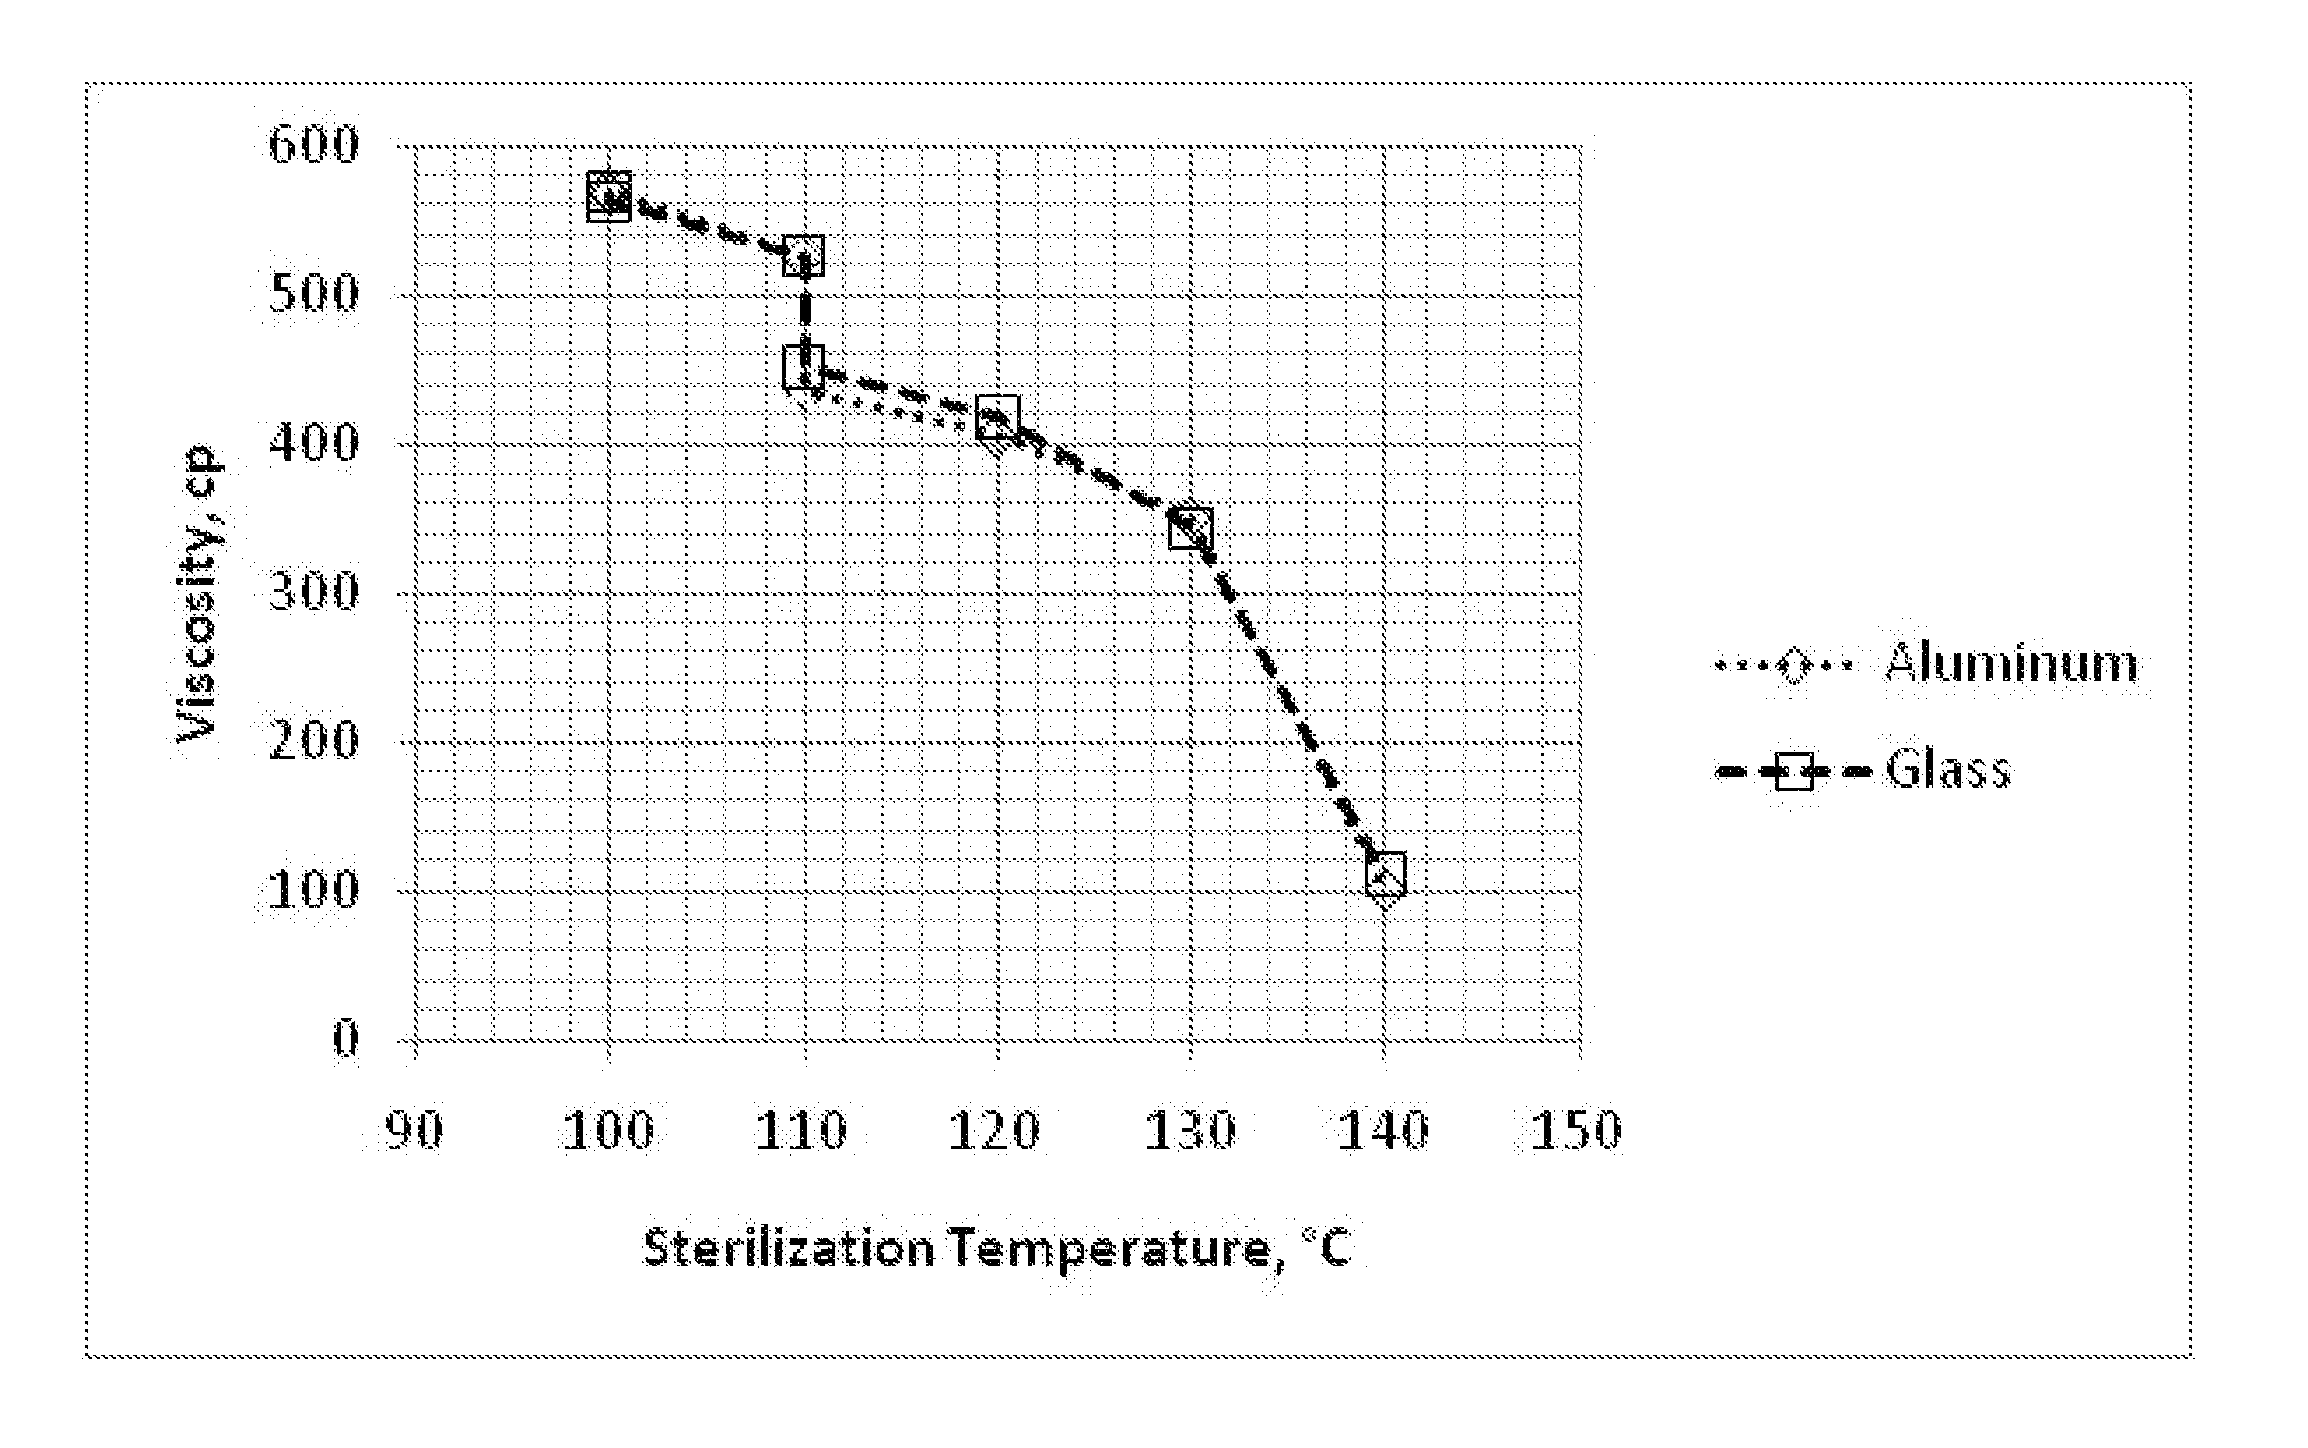 Cyanoacrylate Adhesive Compositions and Devices and Process for Sterilization Thereof